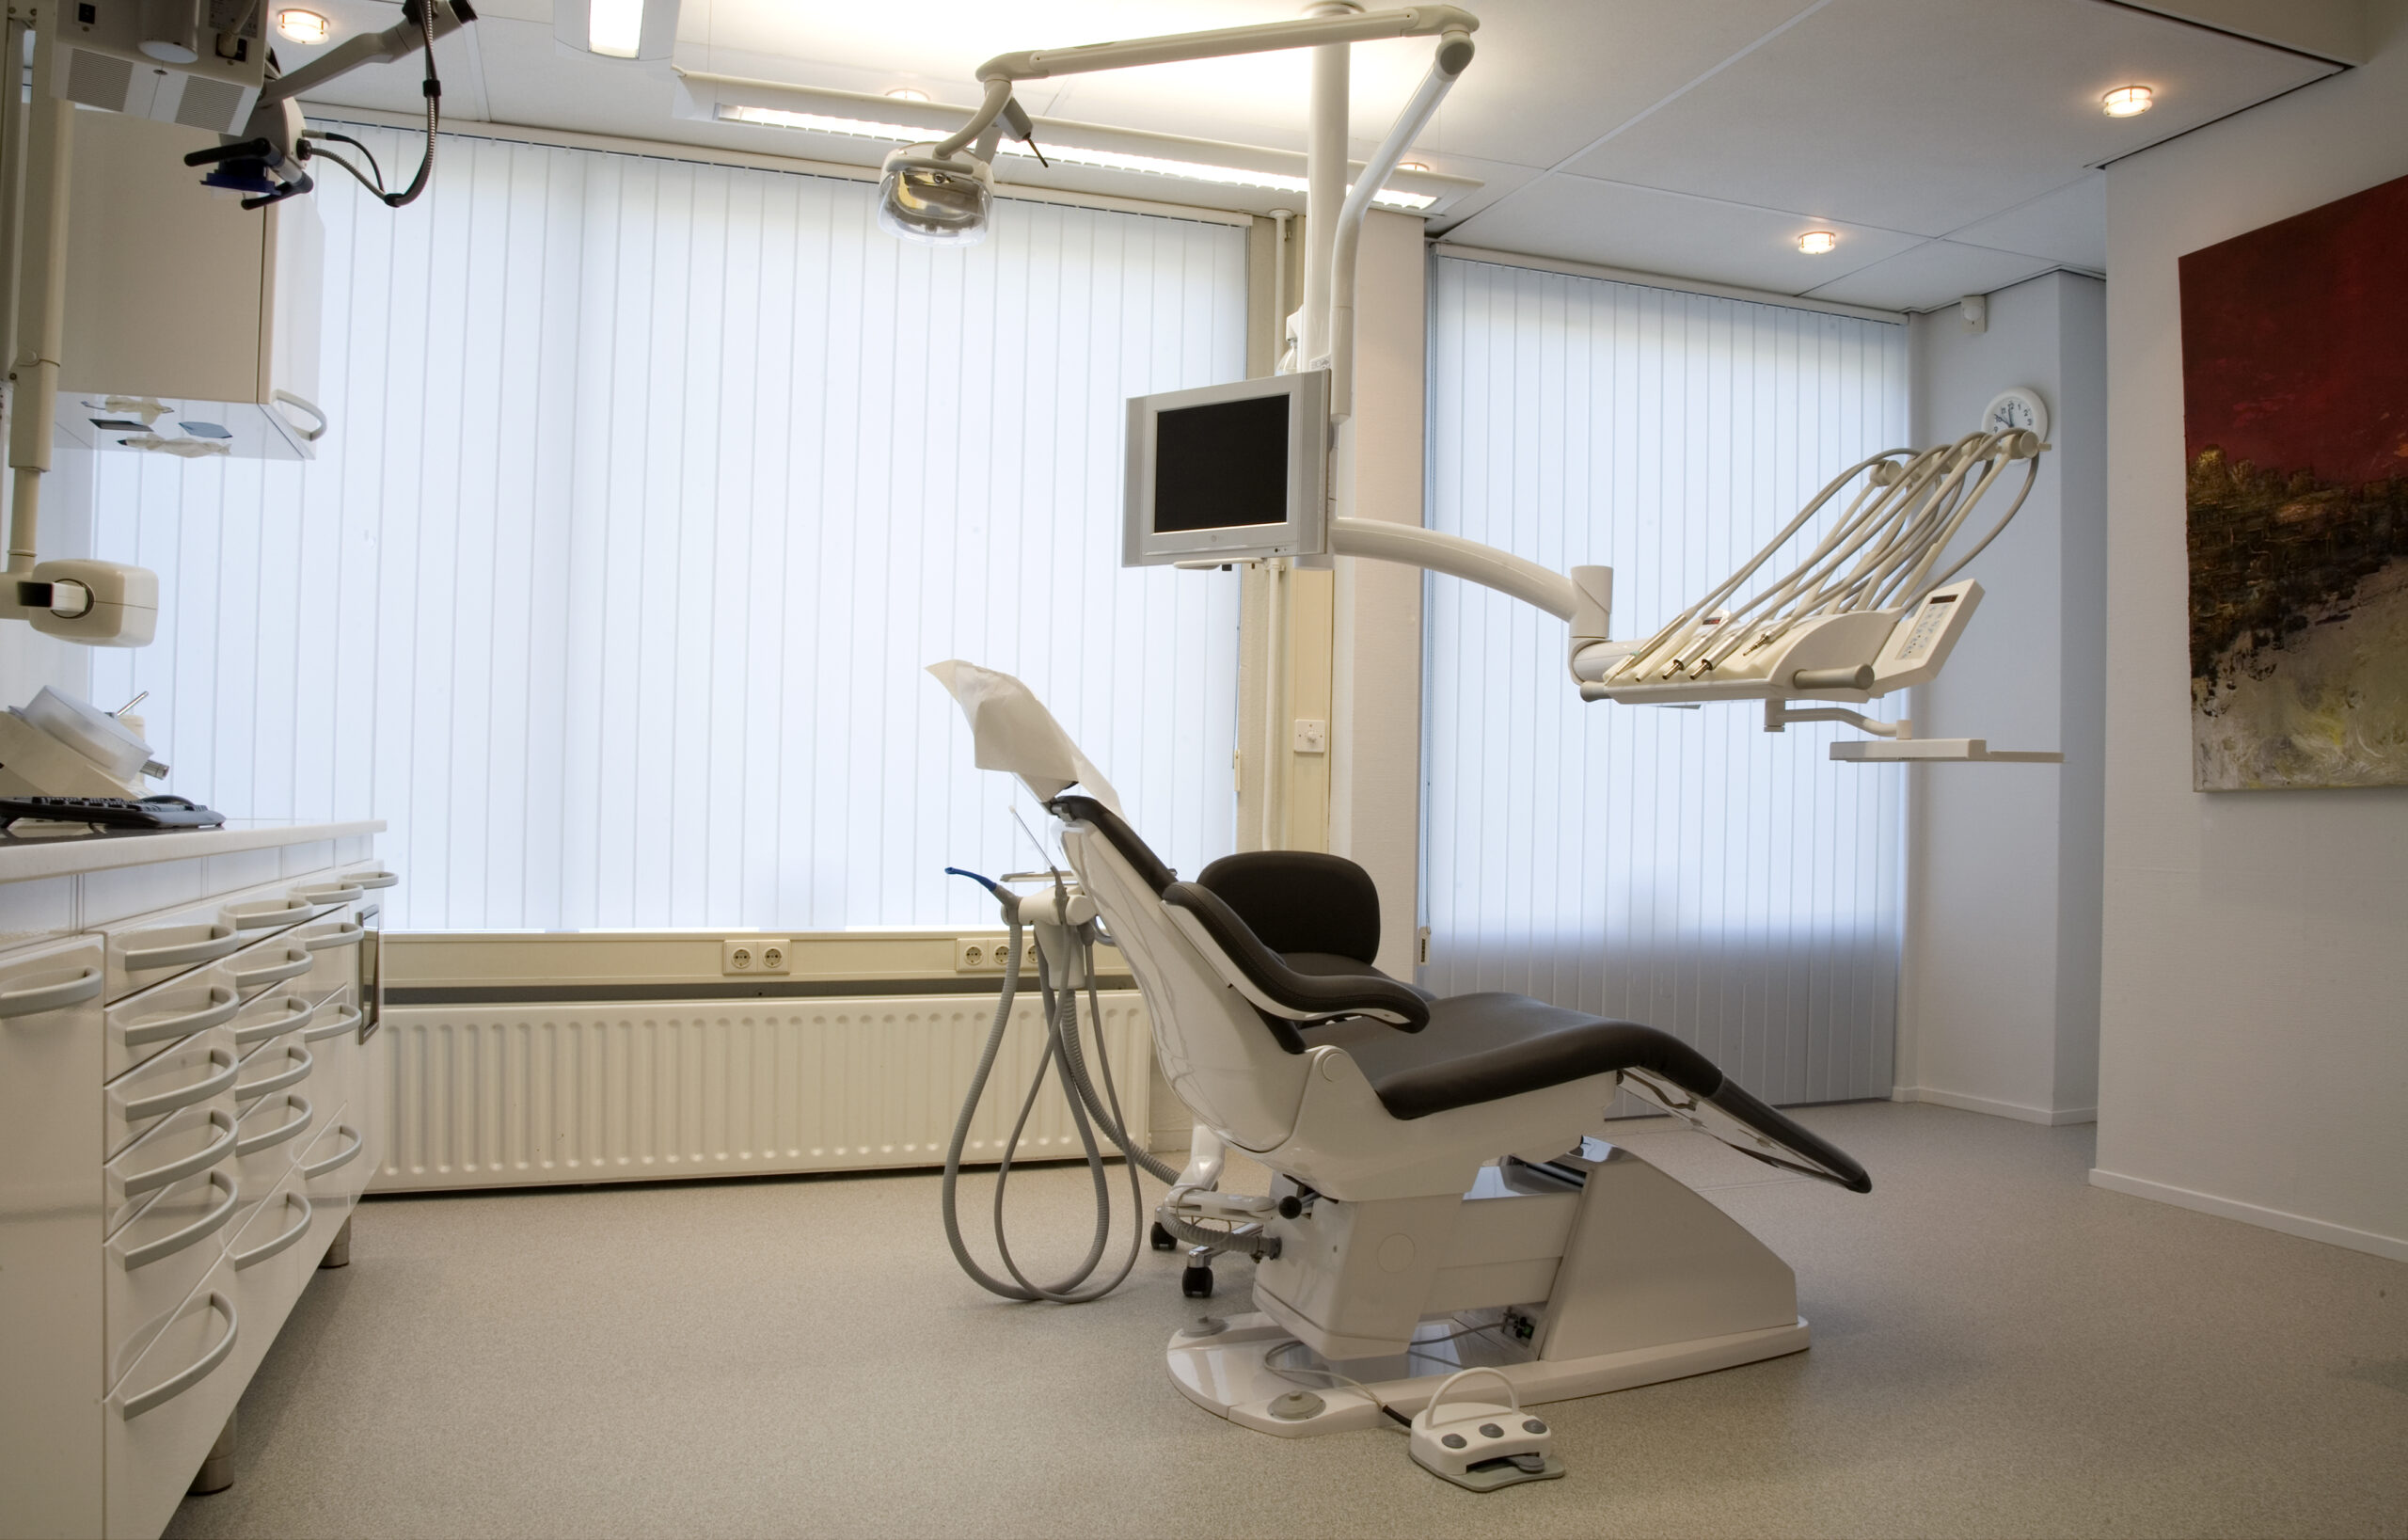 A dentist chair in a room with a large window.